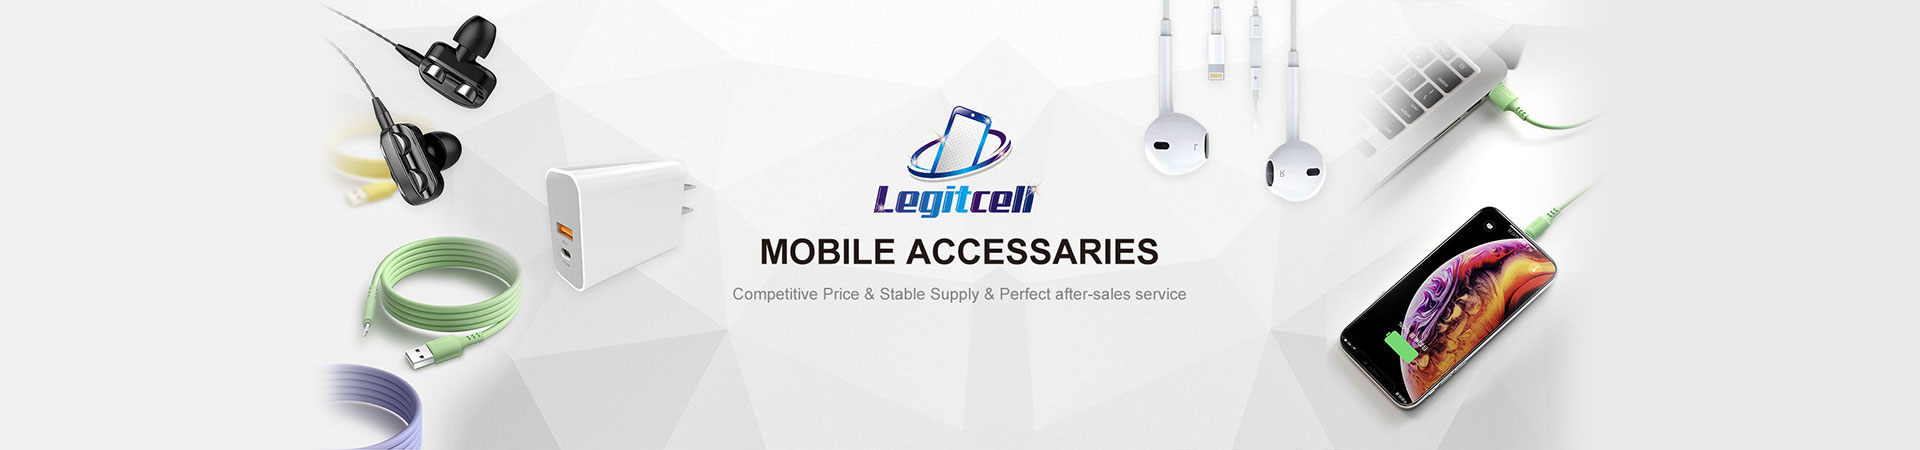 Legitcell Products